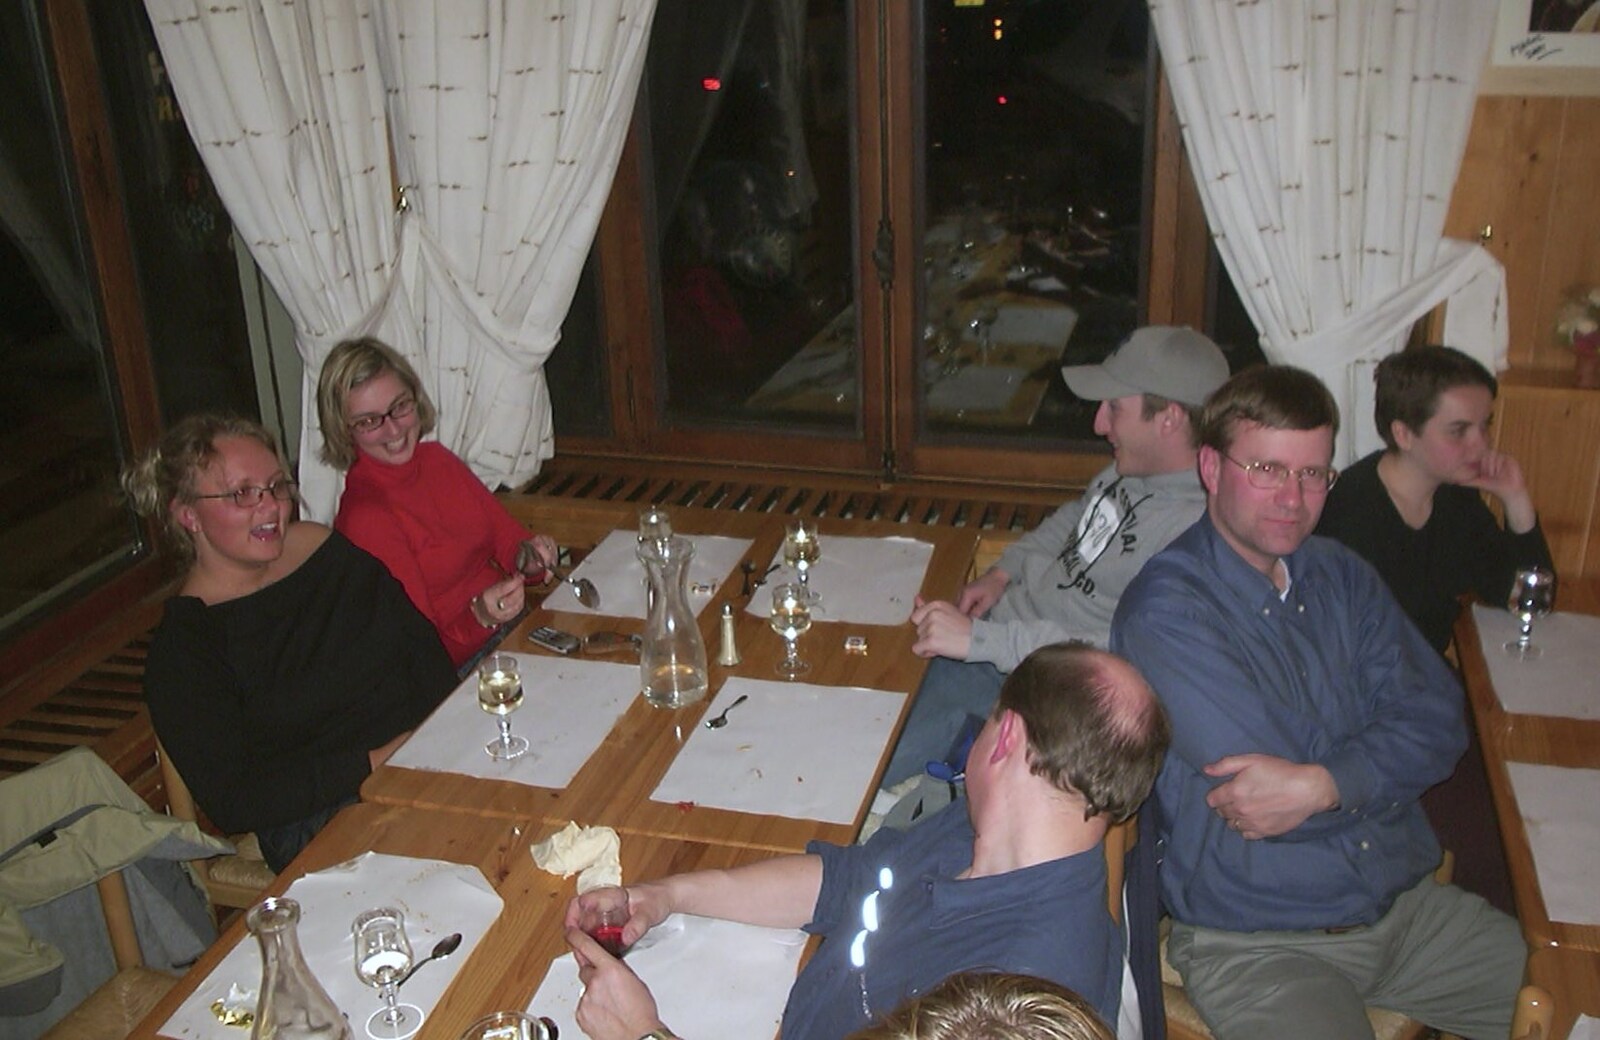 The first night's dinner from 3G Lab Goes Skiing In Chamonix, France - 12th March 2002